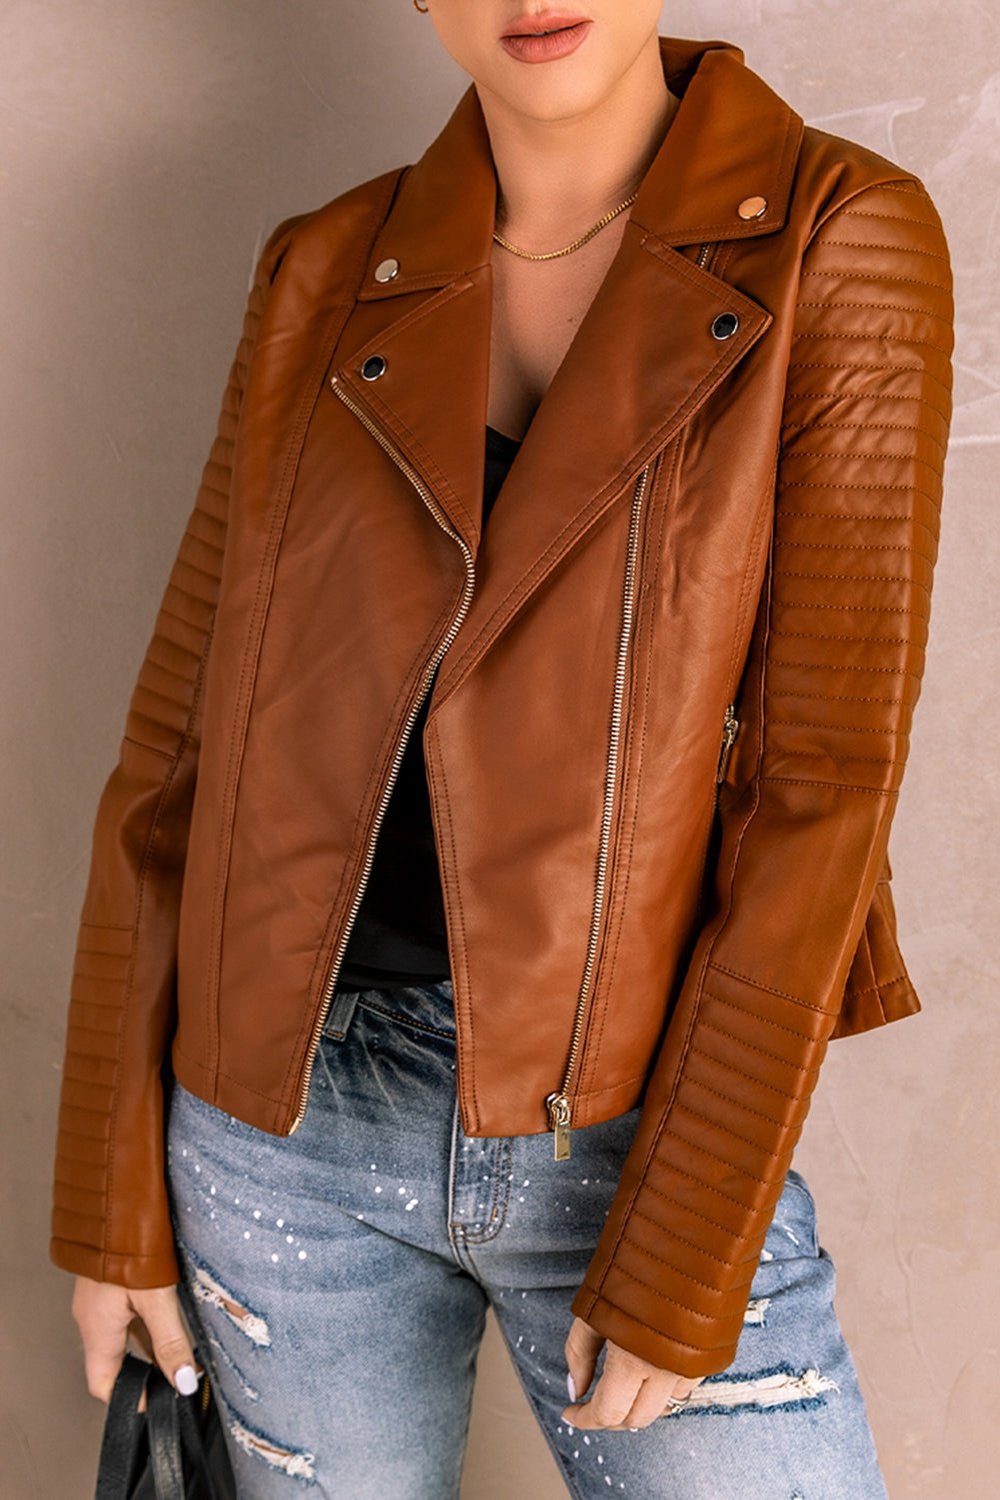 Ribbed Faux Leather Jacket - Jackets - FITGGINS